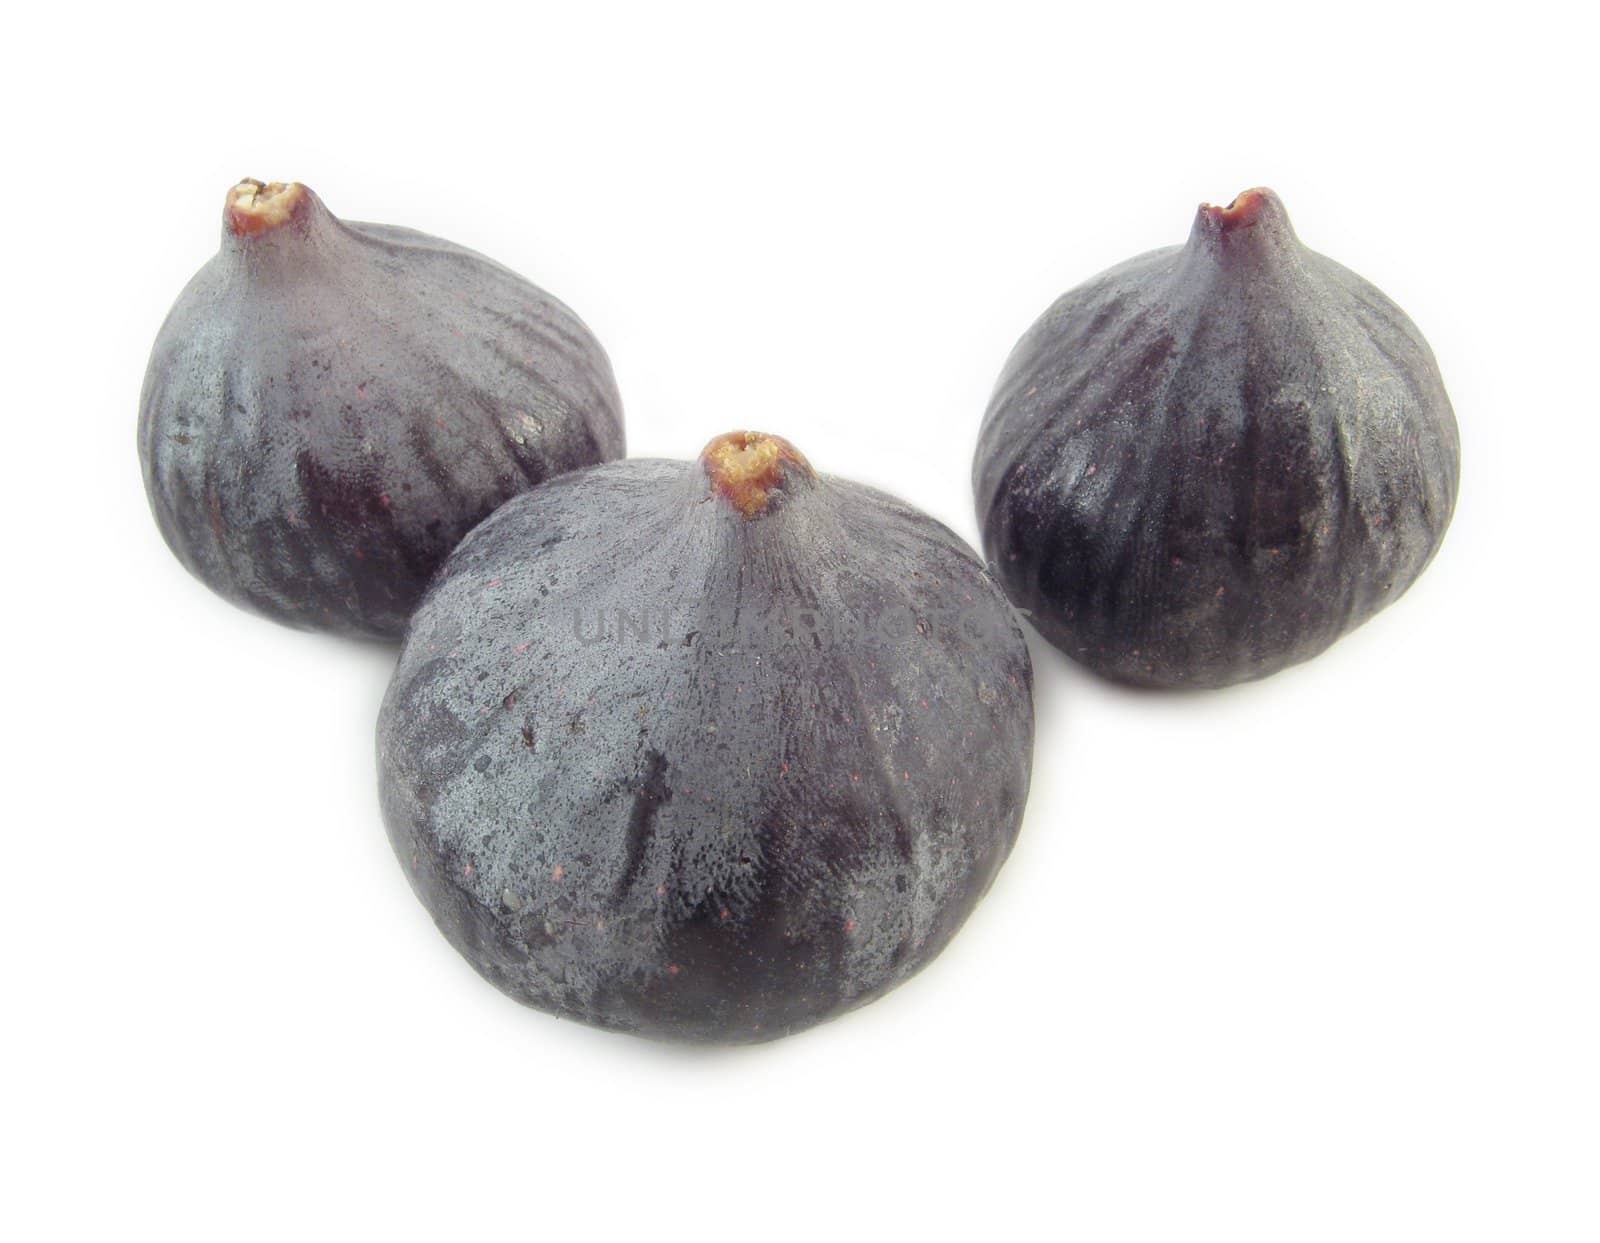 a few figs on a white background